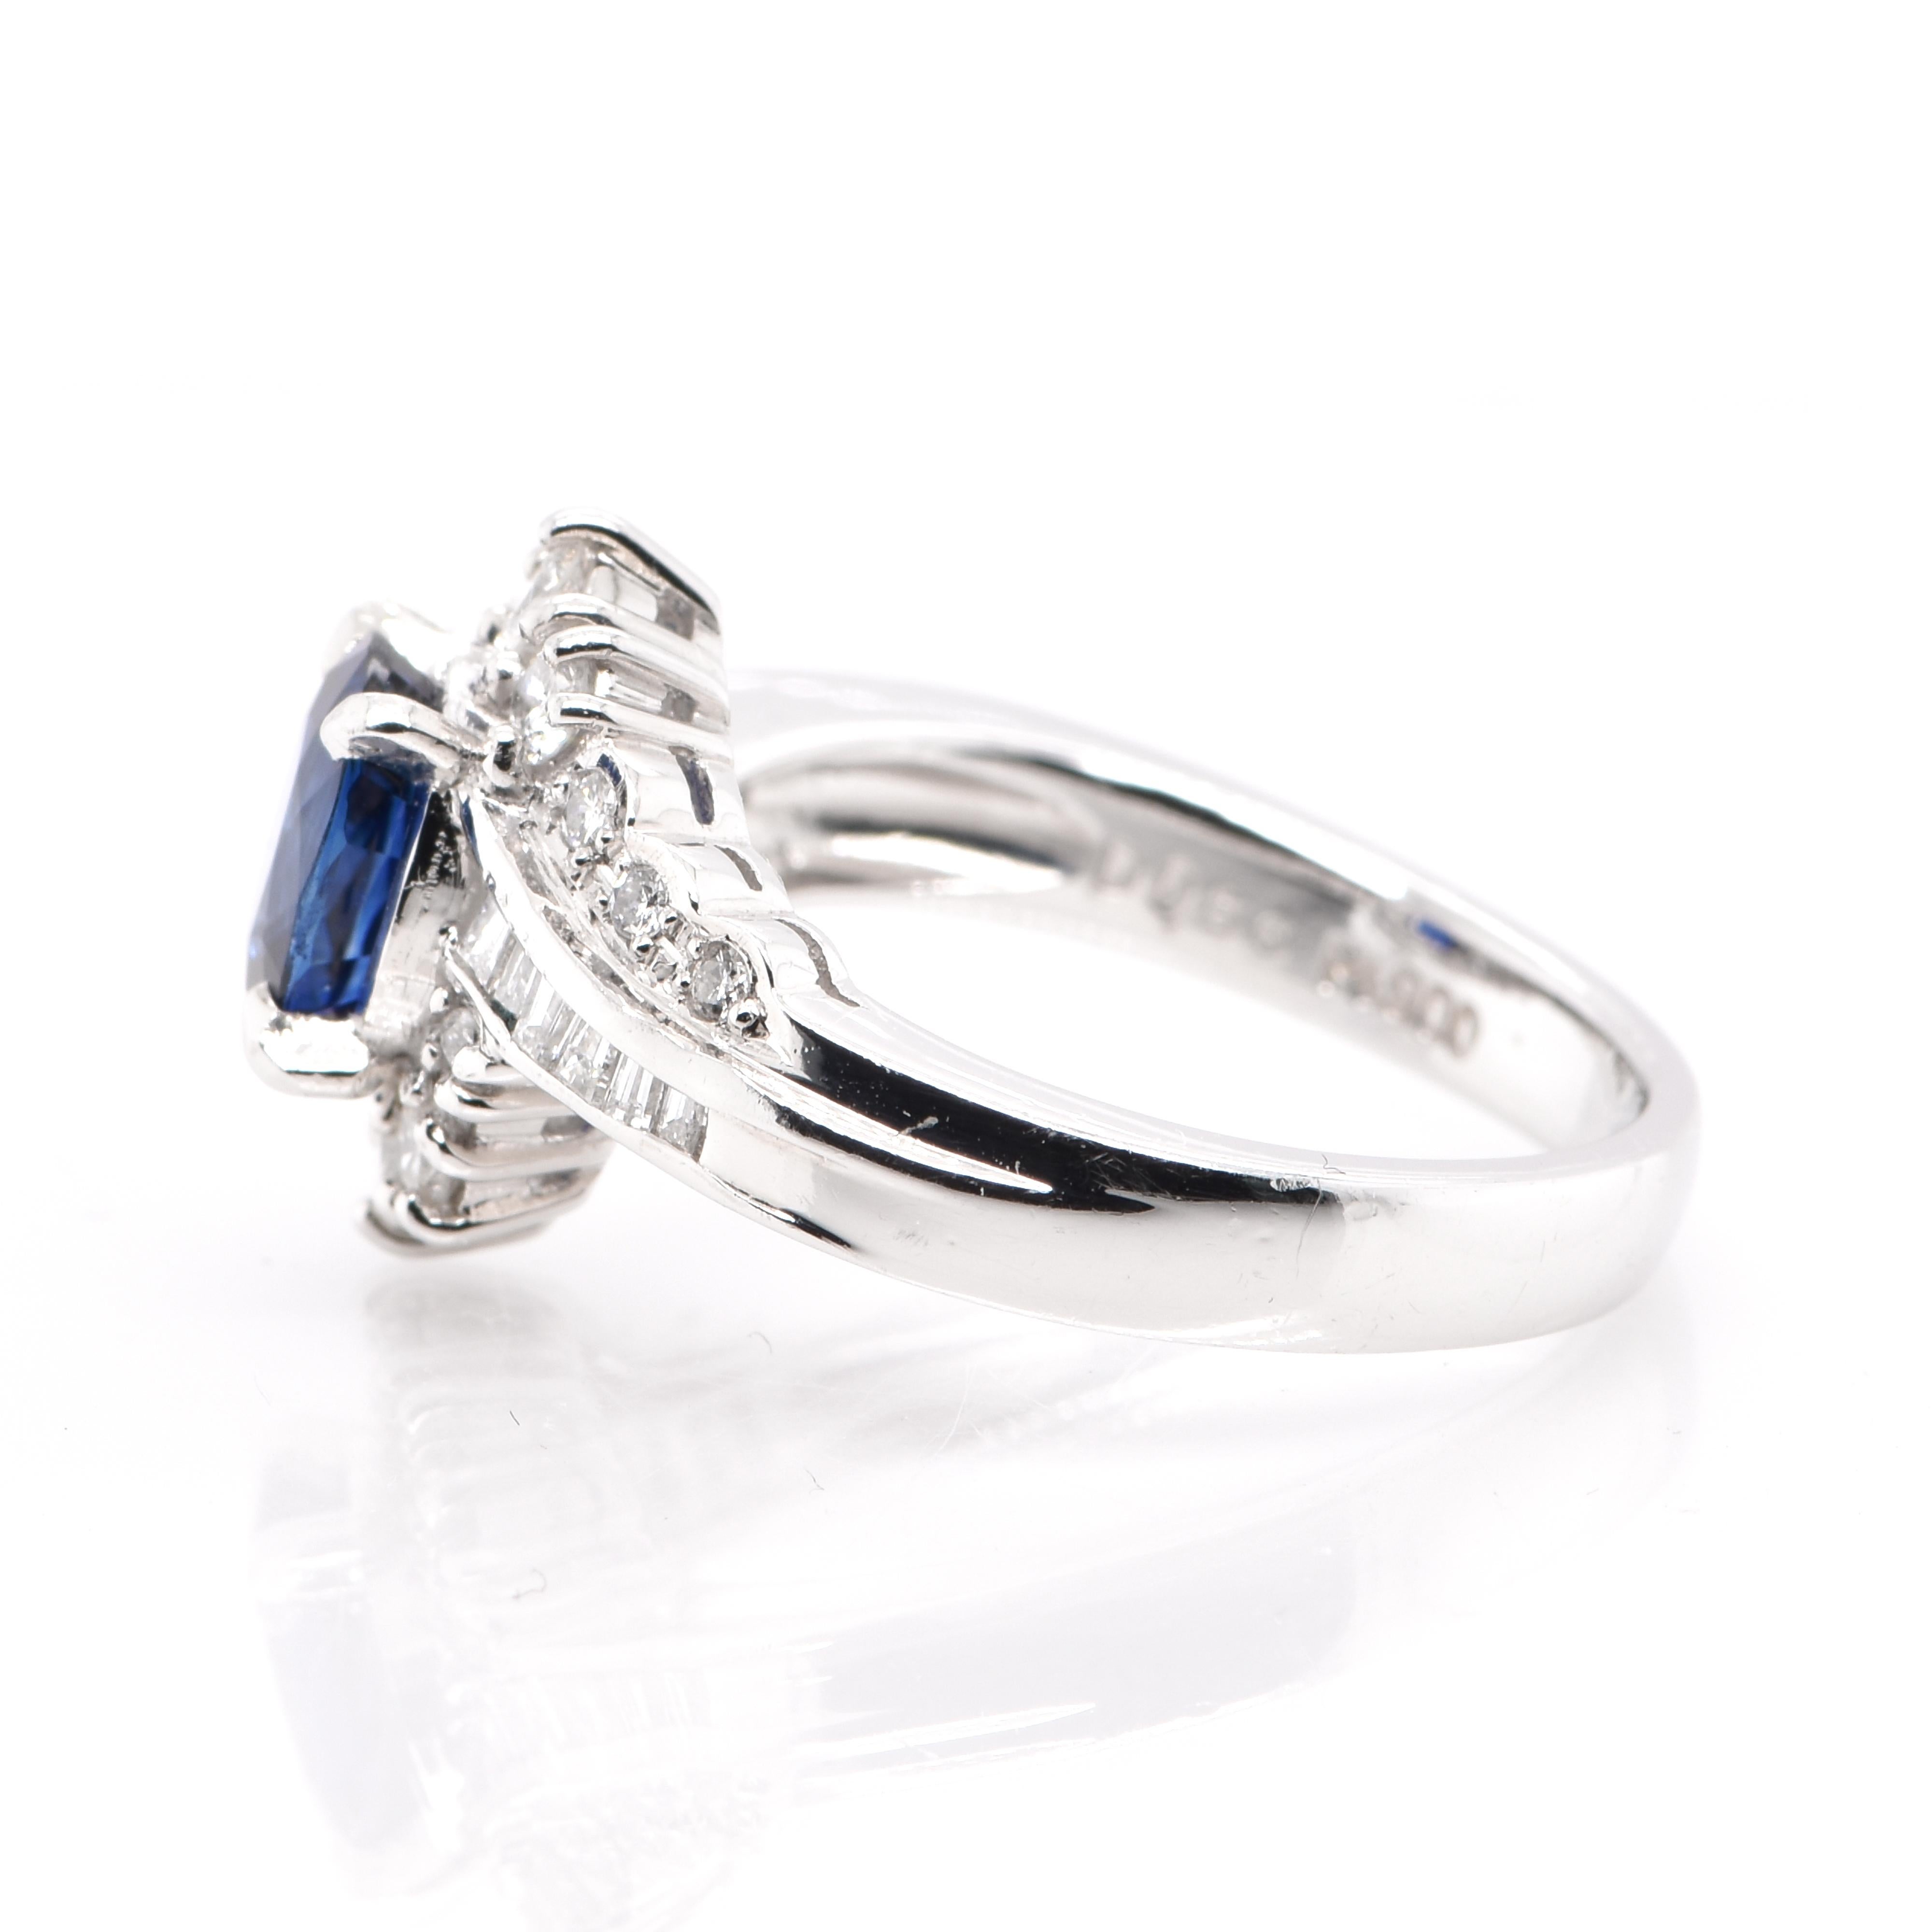 Oval Cut 1.52 Carat Natural Royal Blue Sapphire and Diamond Ring Set in Platinum For Sale